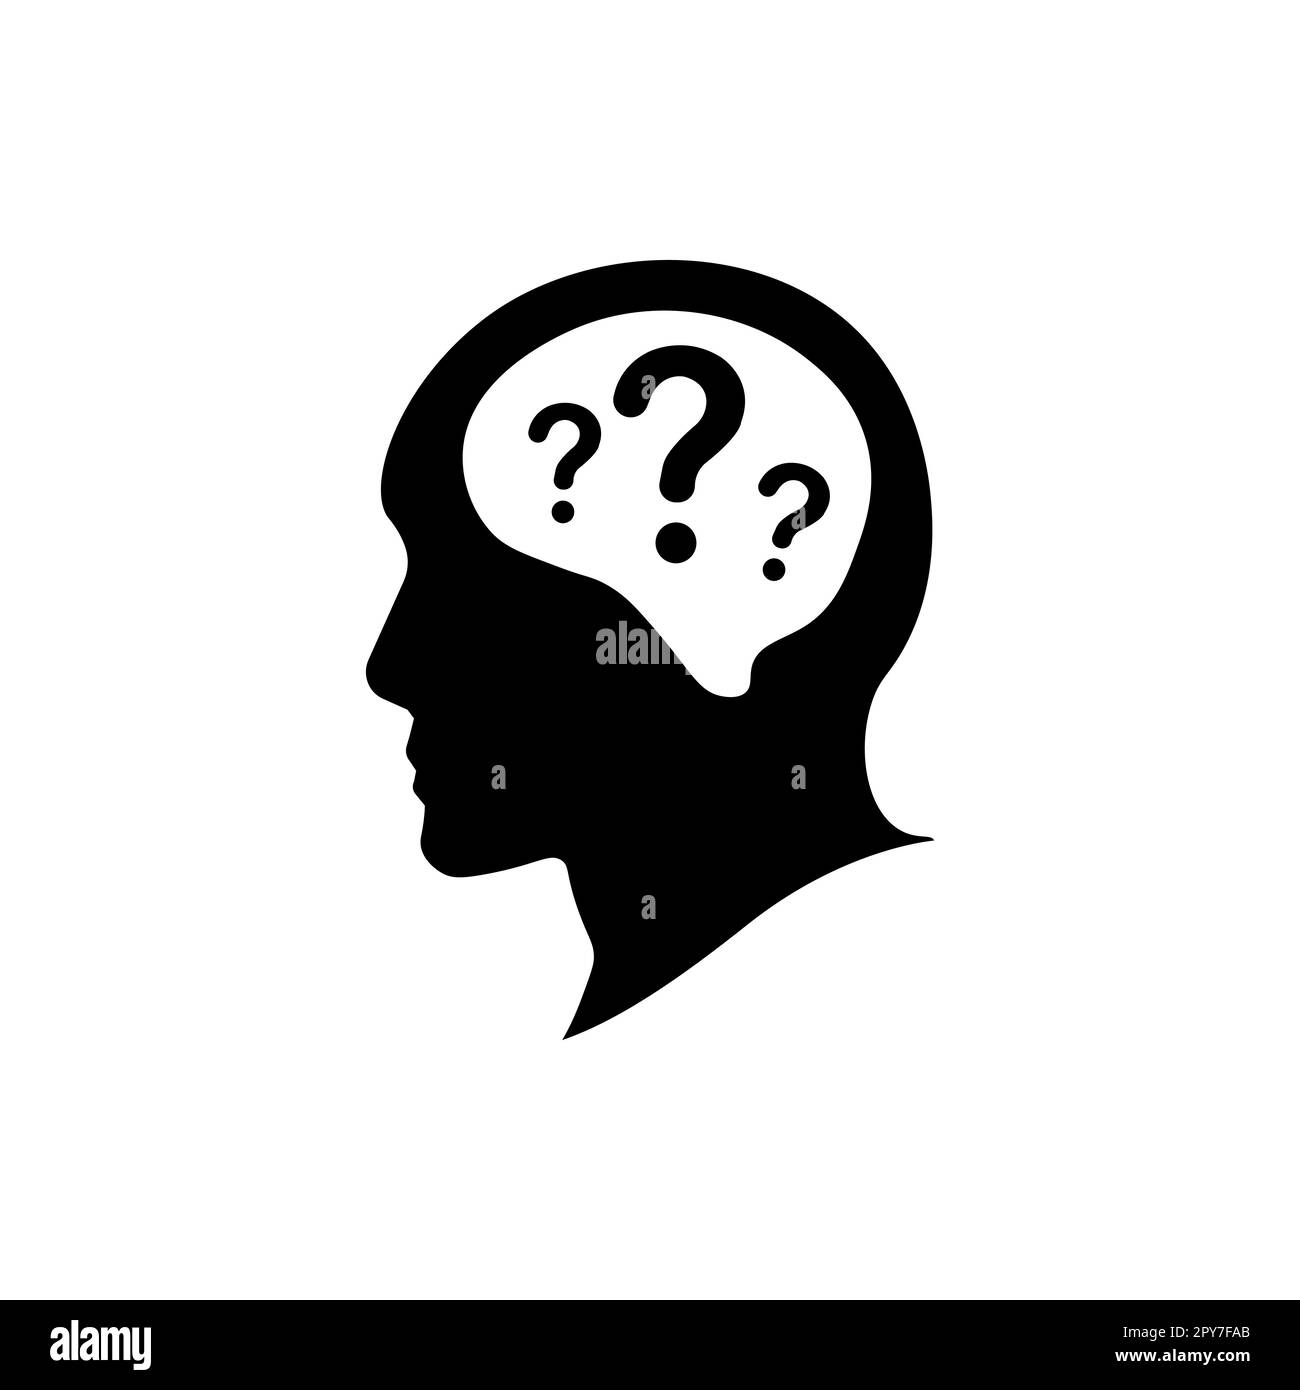 Speechless human icon with question mark design. Stock Vector